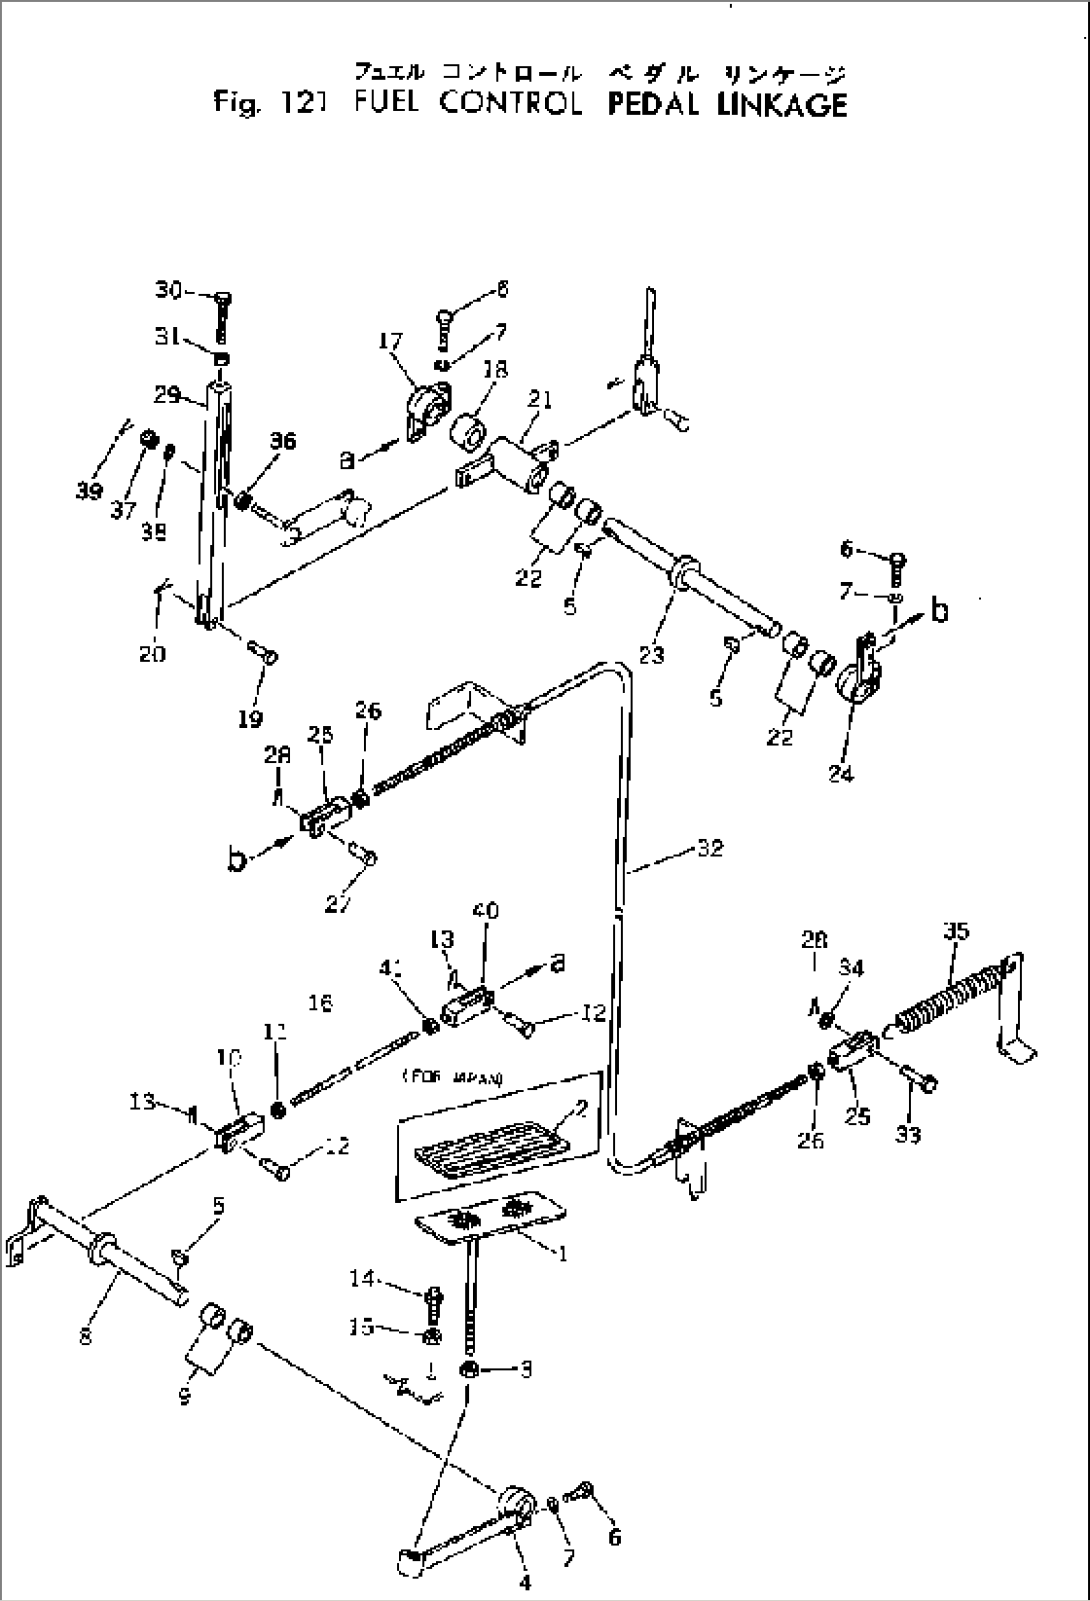 FUEL CONTROL PEDAL LINKAGE